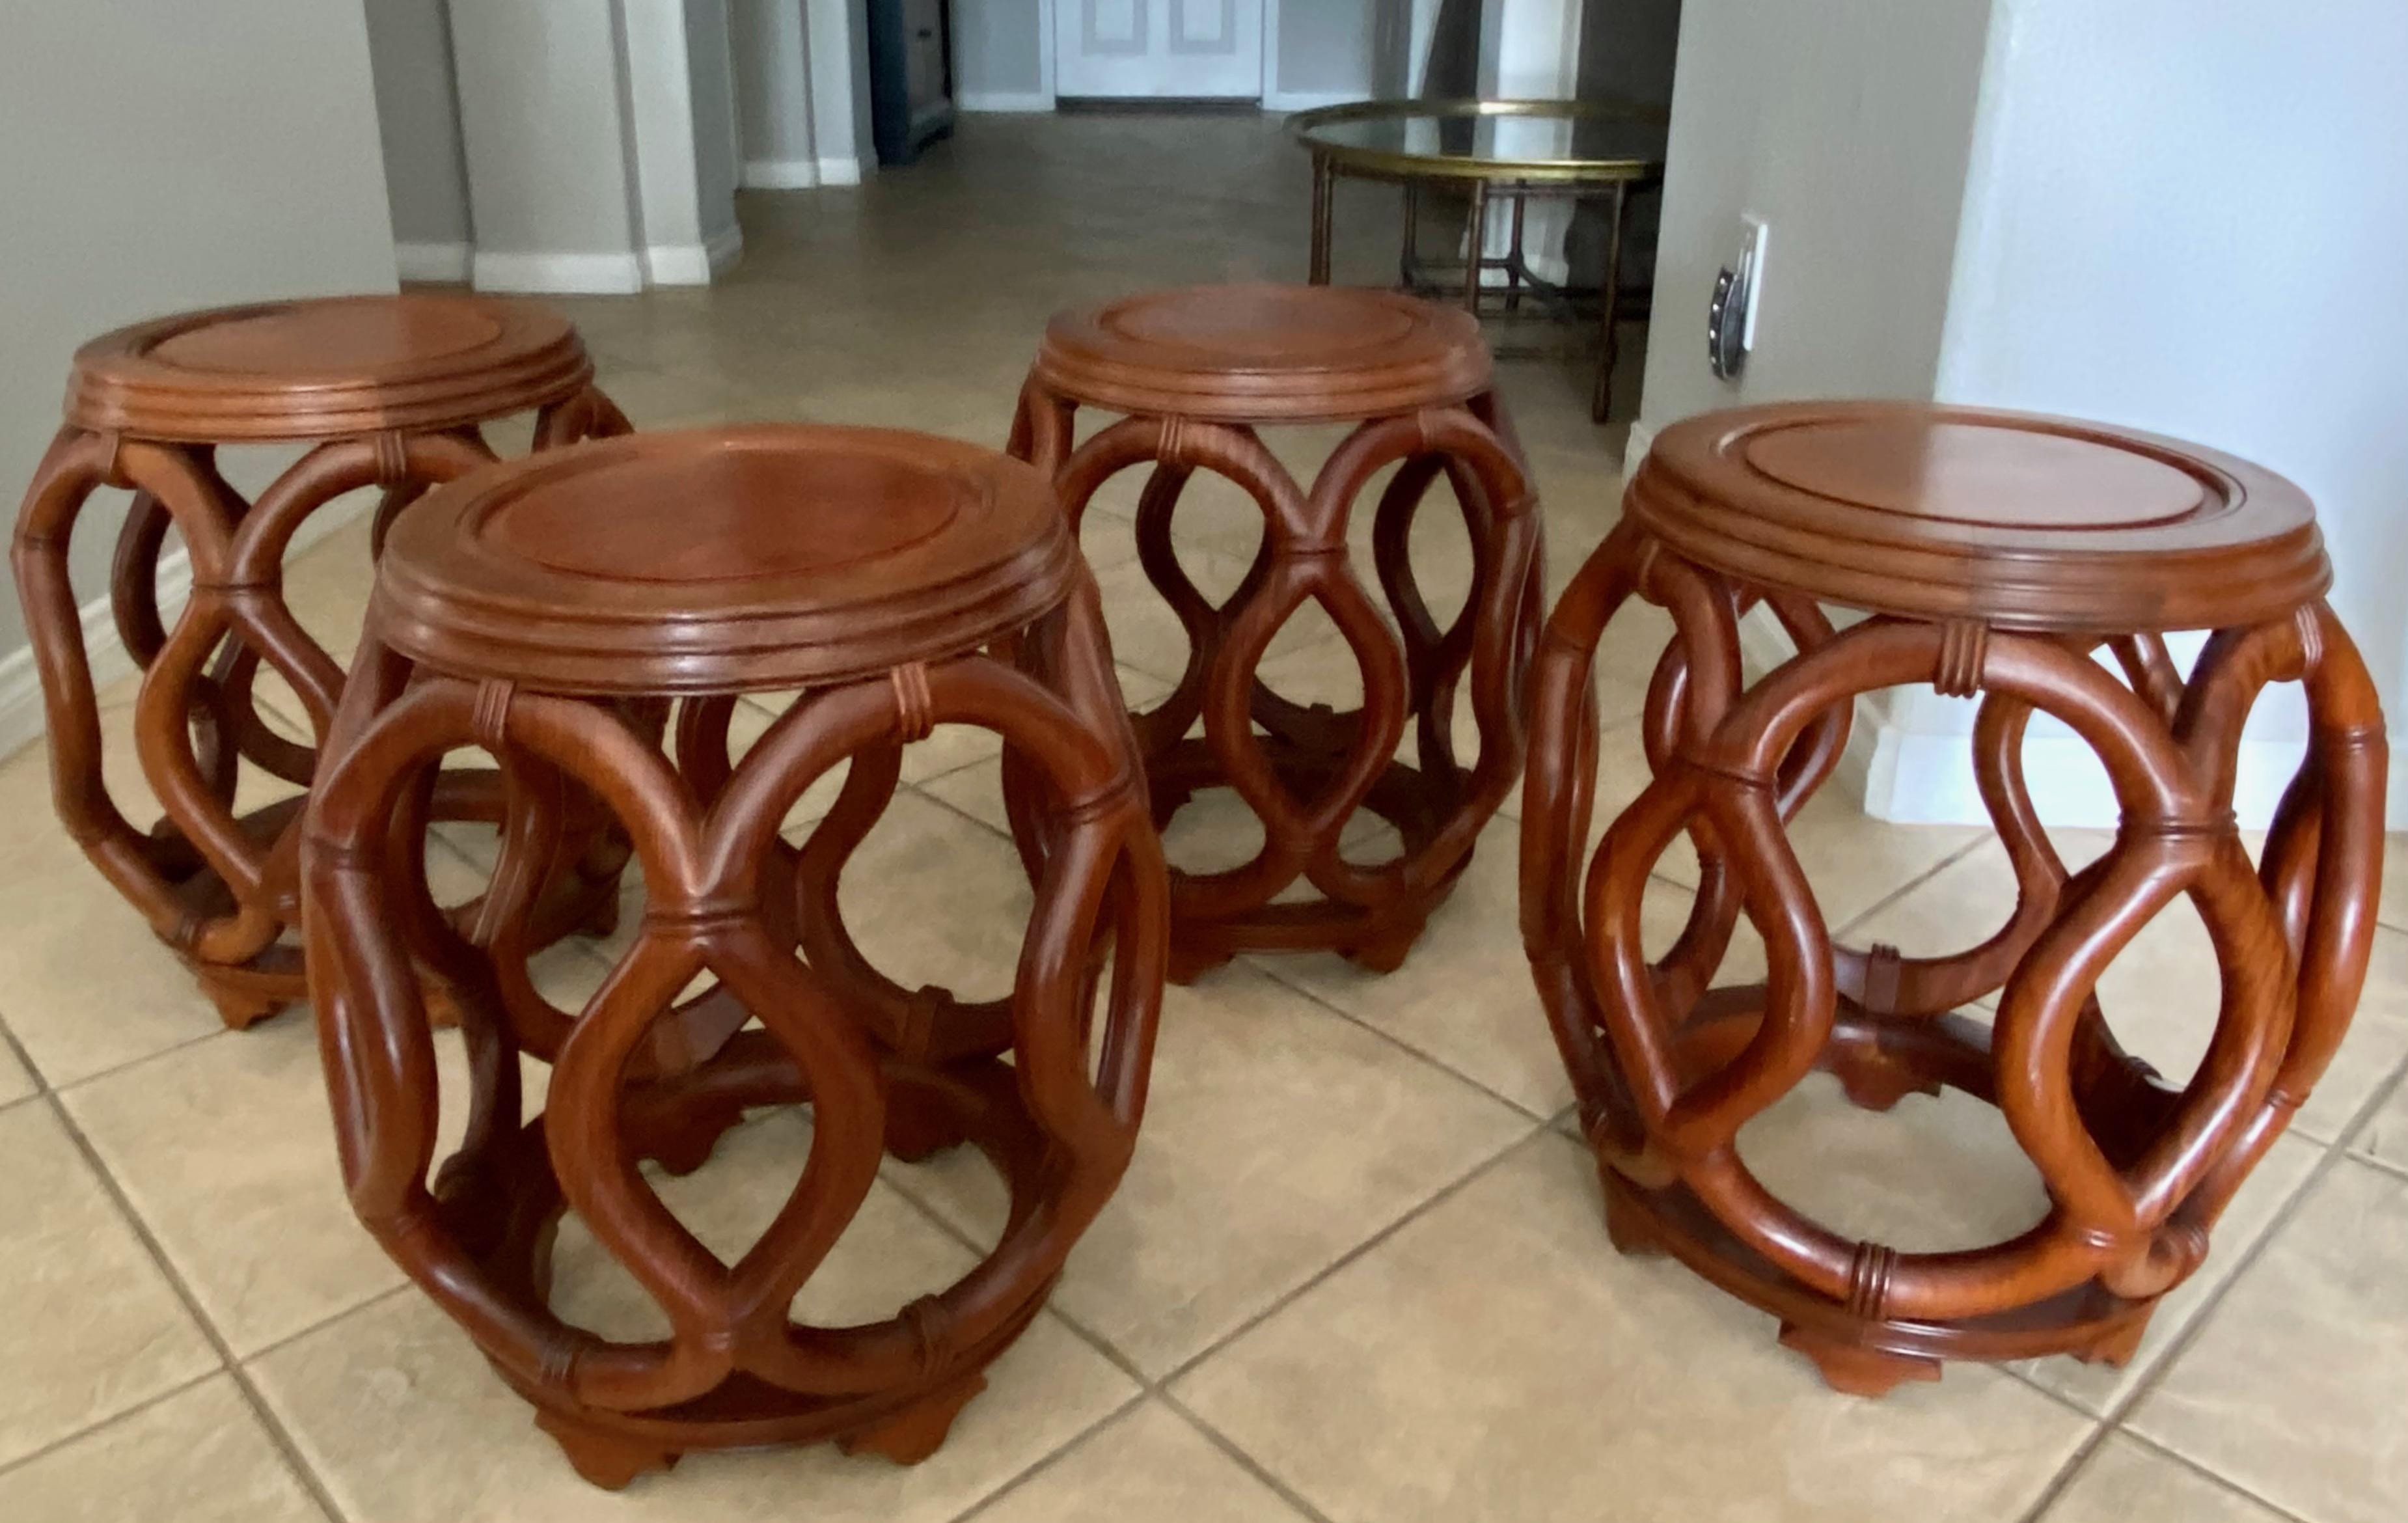 Set of 4 (four) Chinese hardwood barrel form interlaced open work support structure garden stools. Can be used as stools or end tables. (Finding 4 of the same stools is rather rare ... the price $3900 is for all 4 stools.).